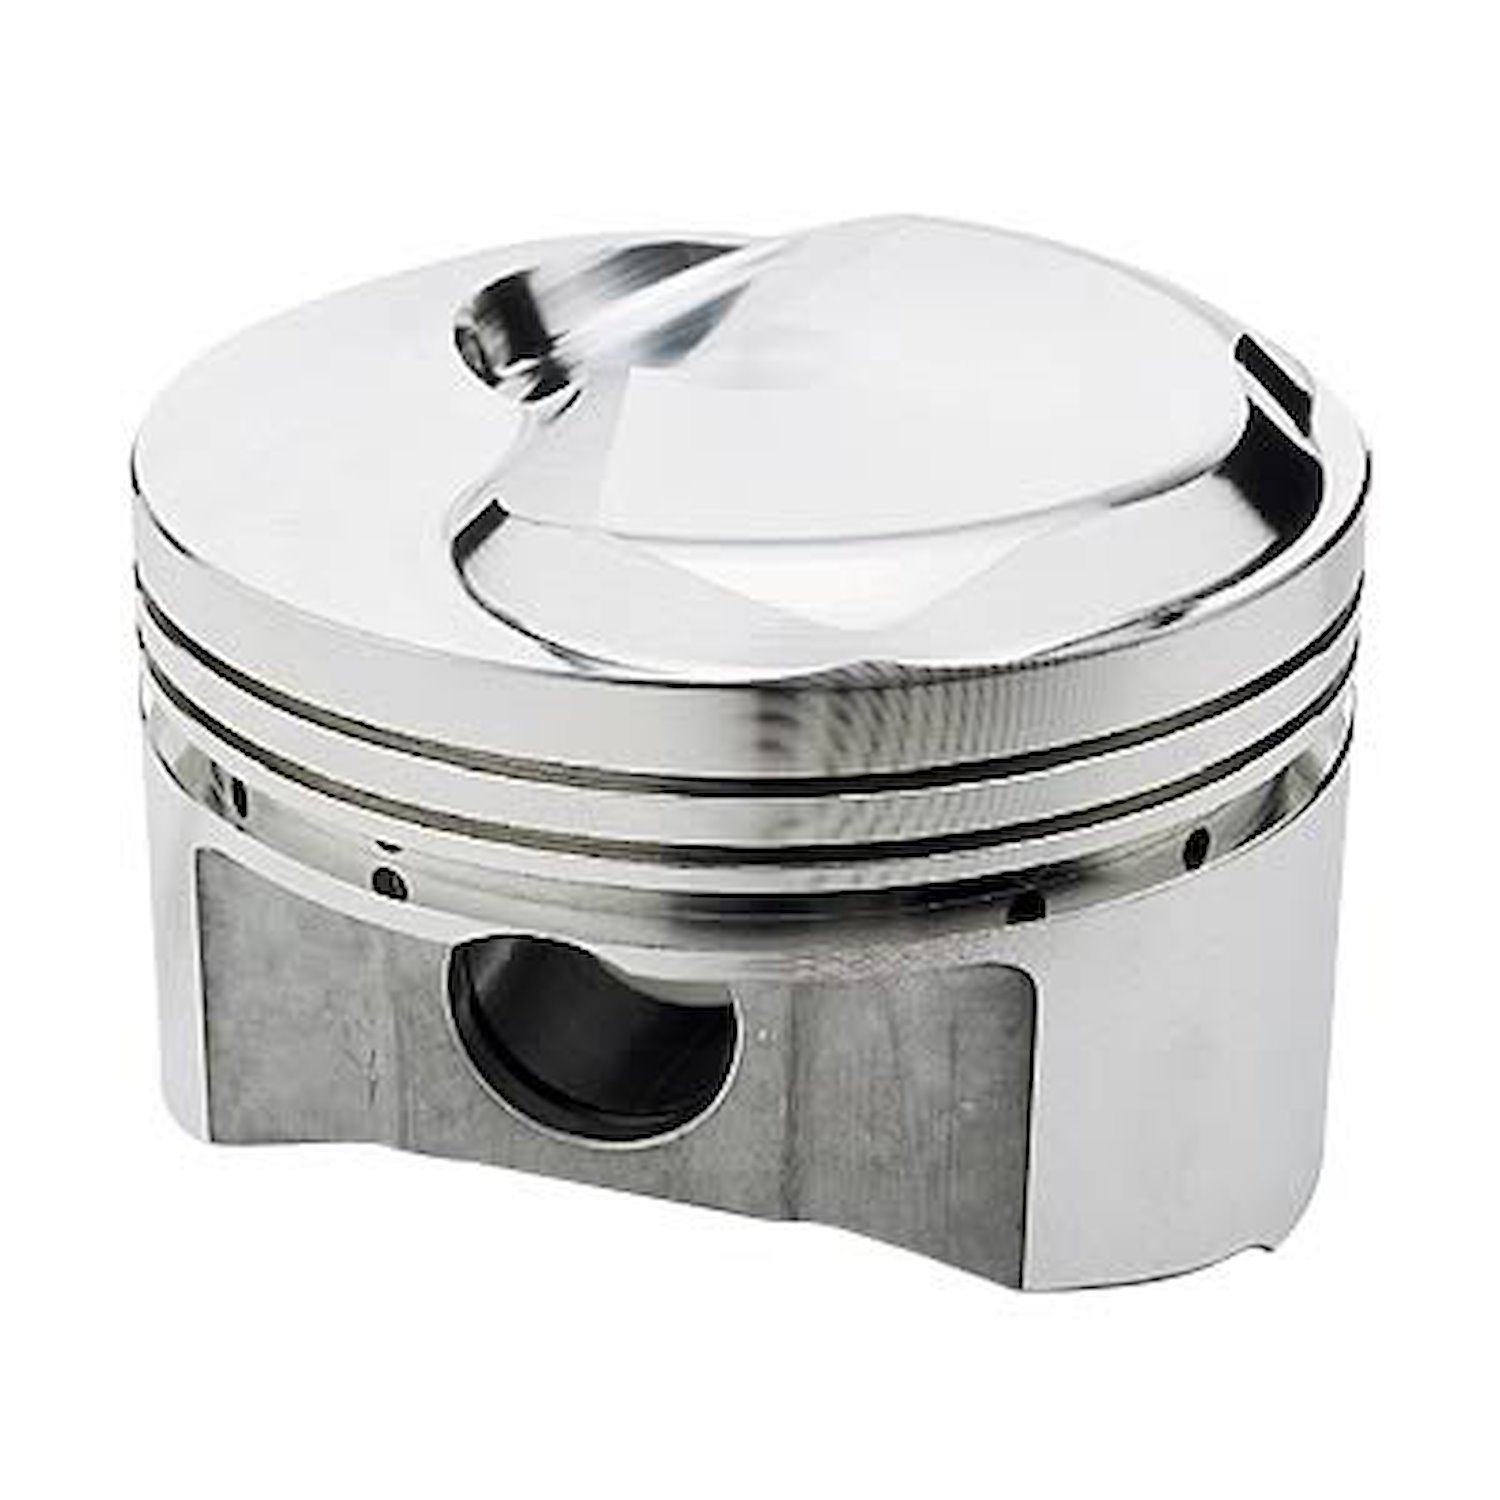 427 Big Block Chevy Small Dome Pistons Open Chamber Style